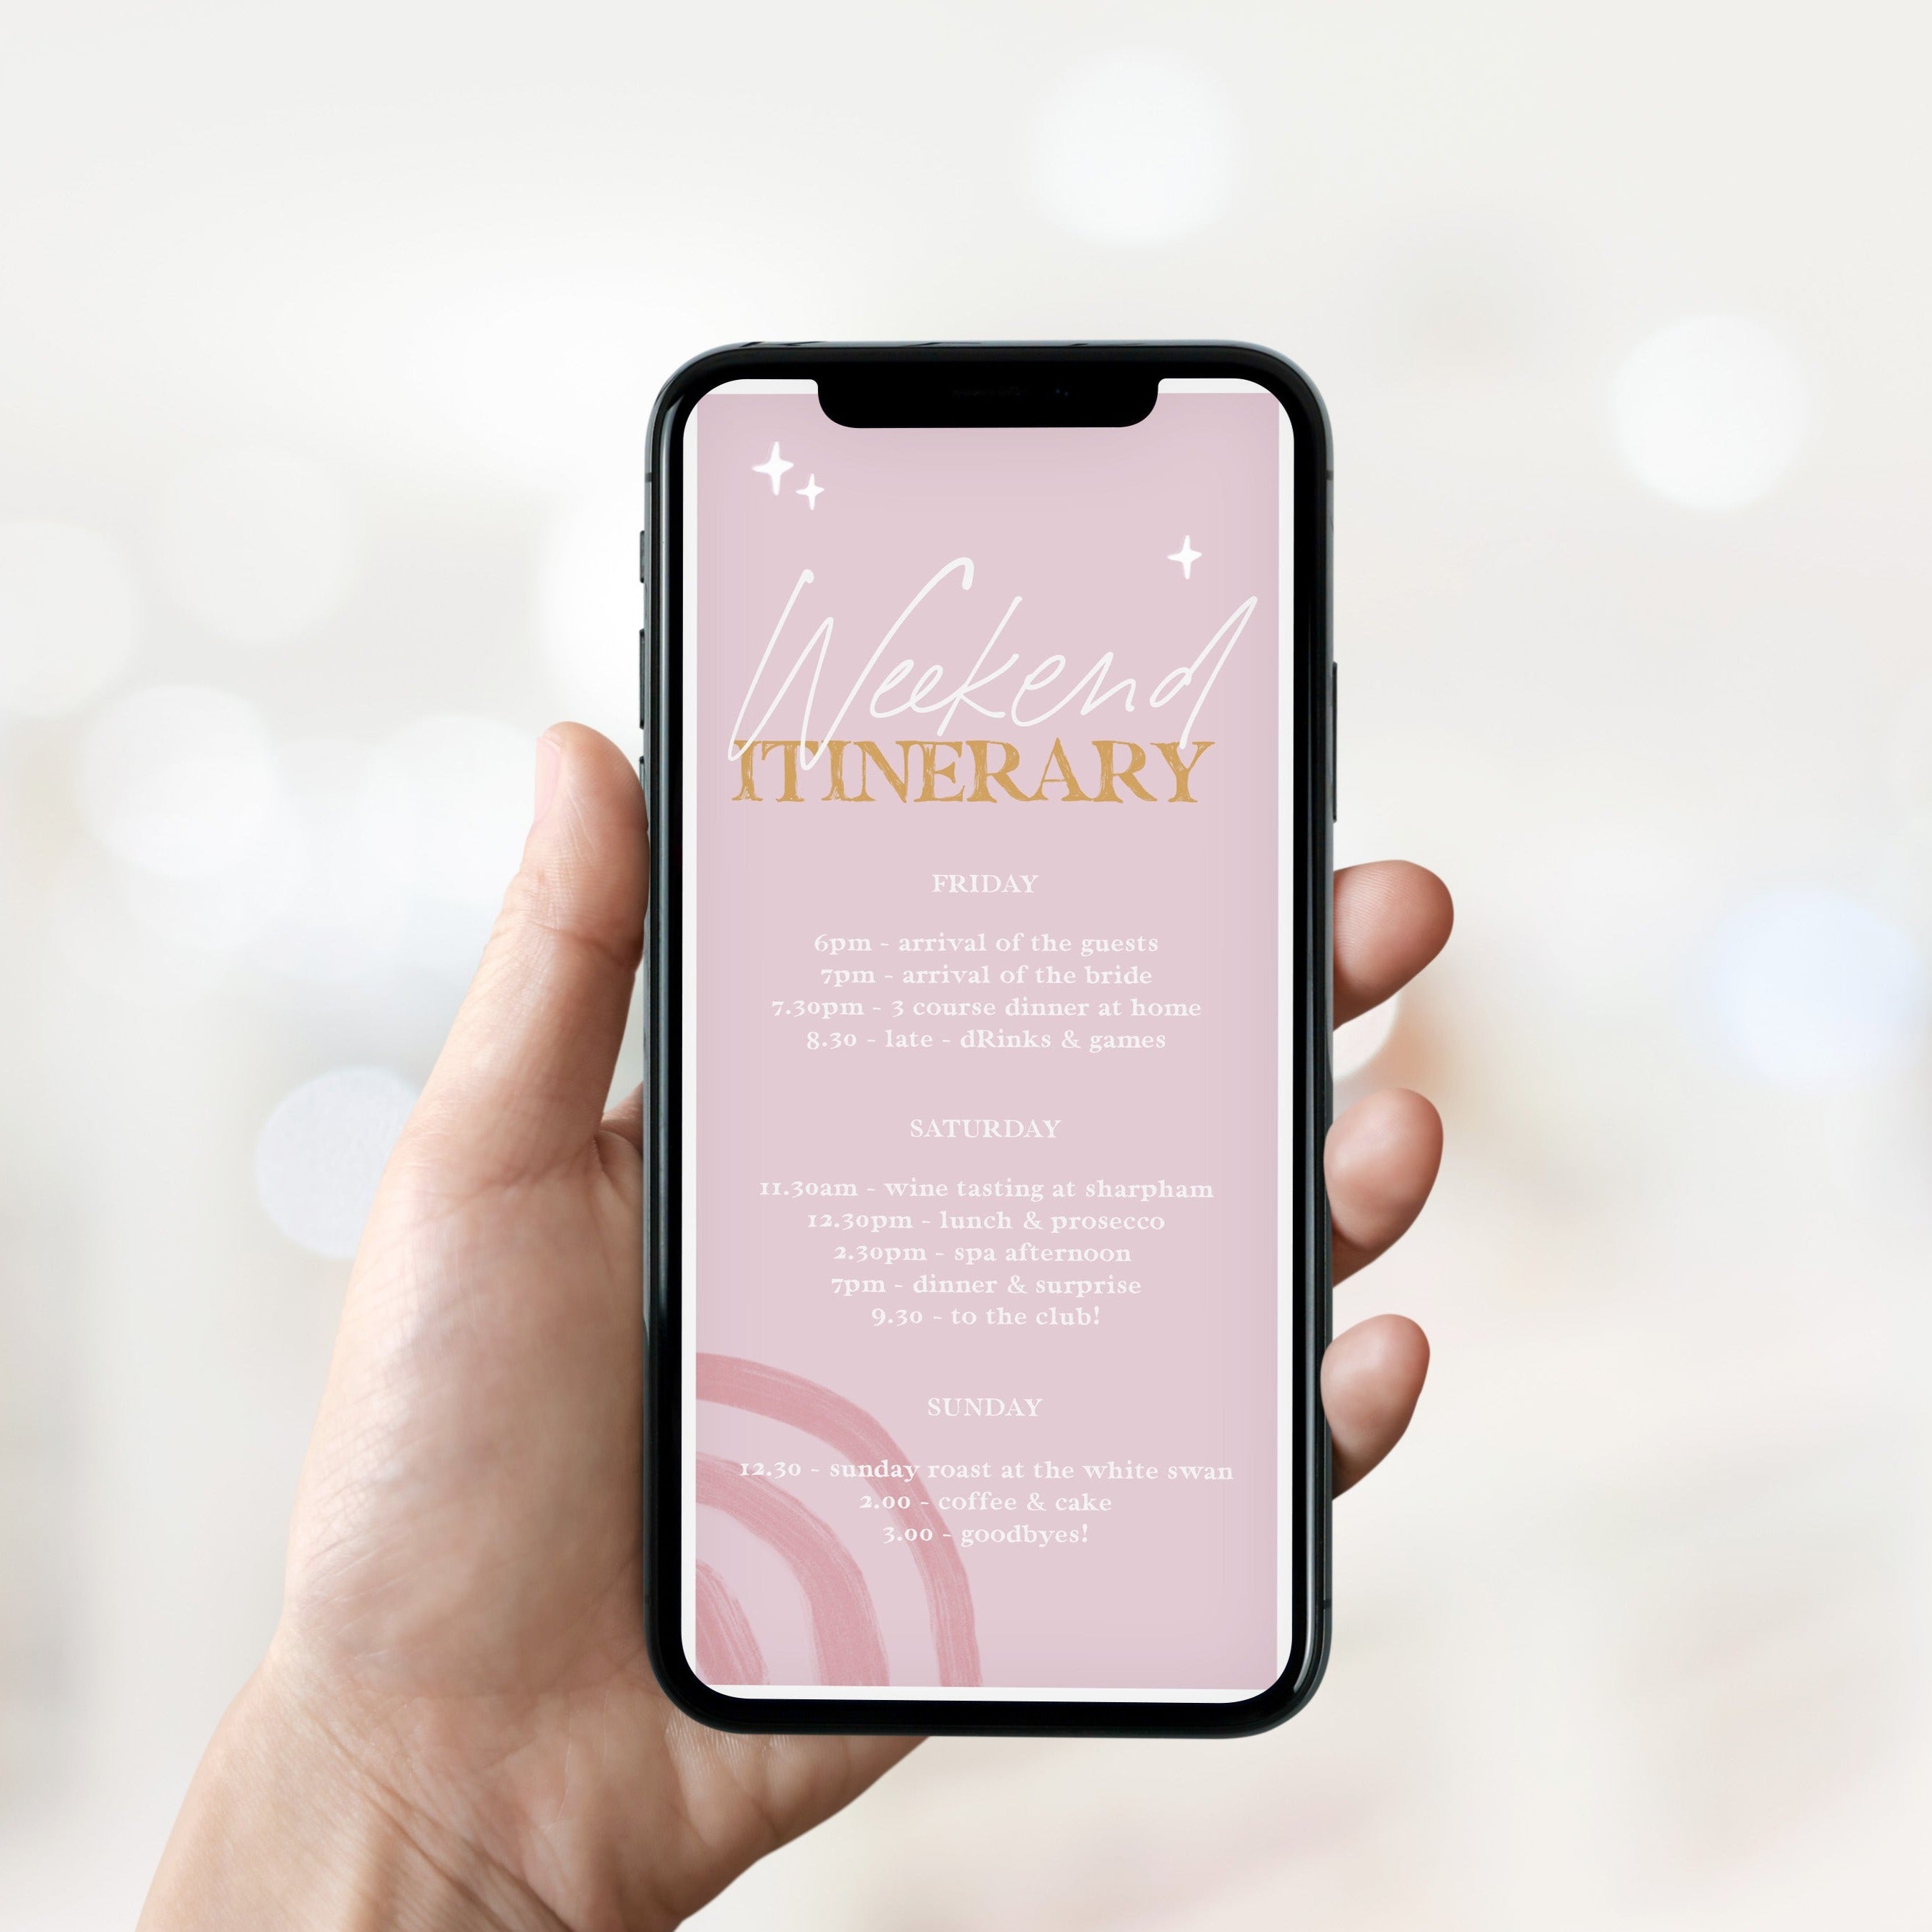 Fully editable and printable hen party weekend mobile invitation with a Palm Springs design. Perfect for a Palm Springs bridal shower themed party